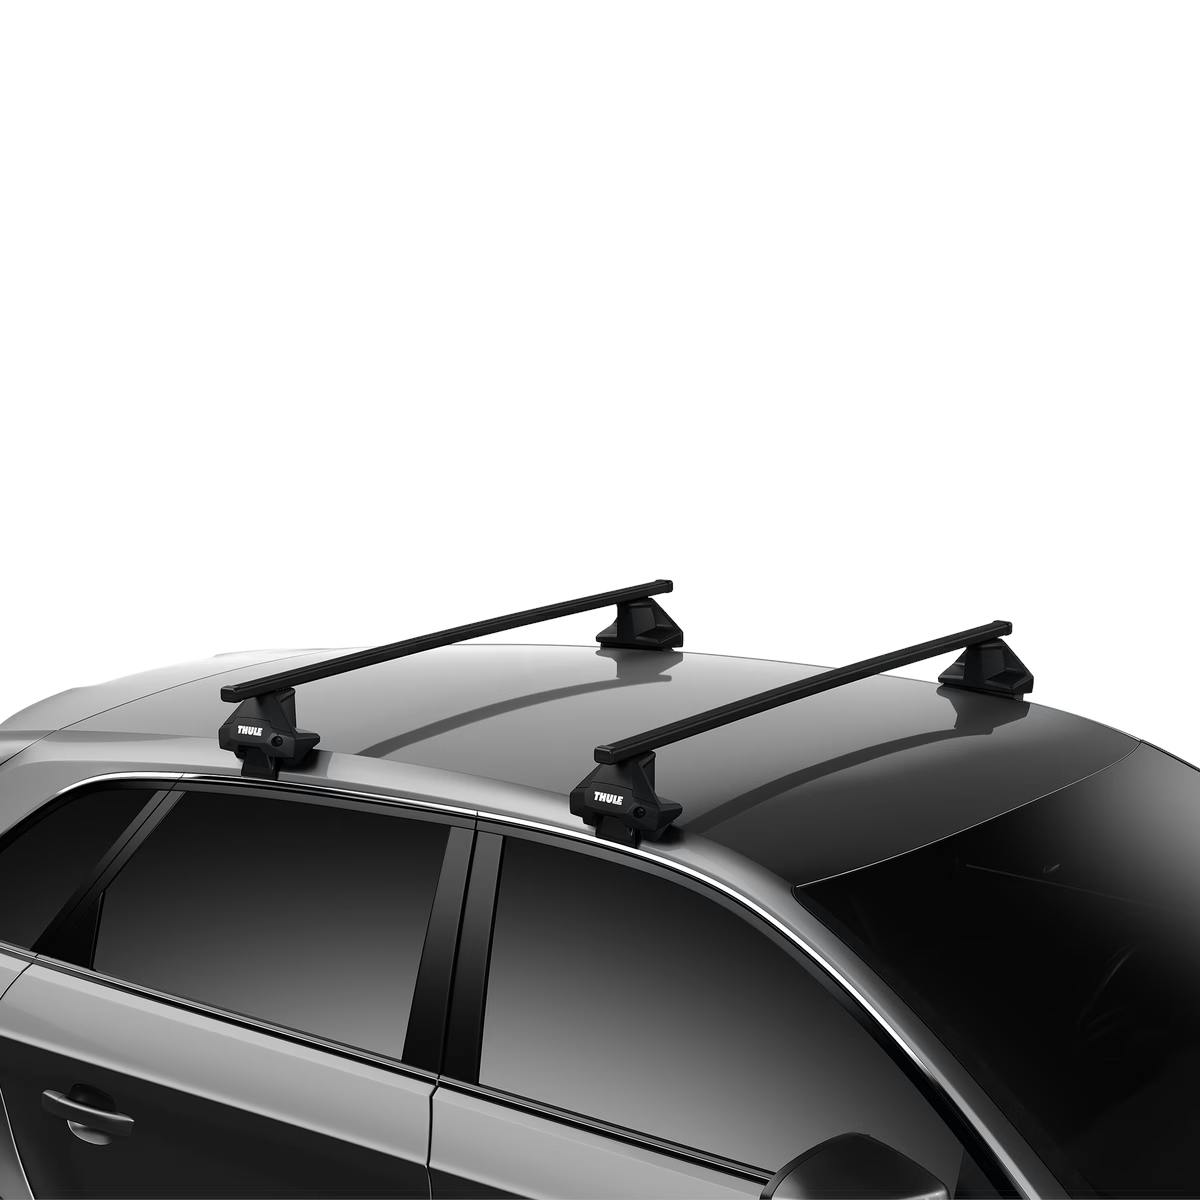 Thule Complete Evo Clamp Roof Rack 710501c with Square Load Bars for Naked Car Roof-tops